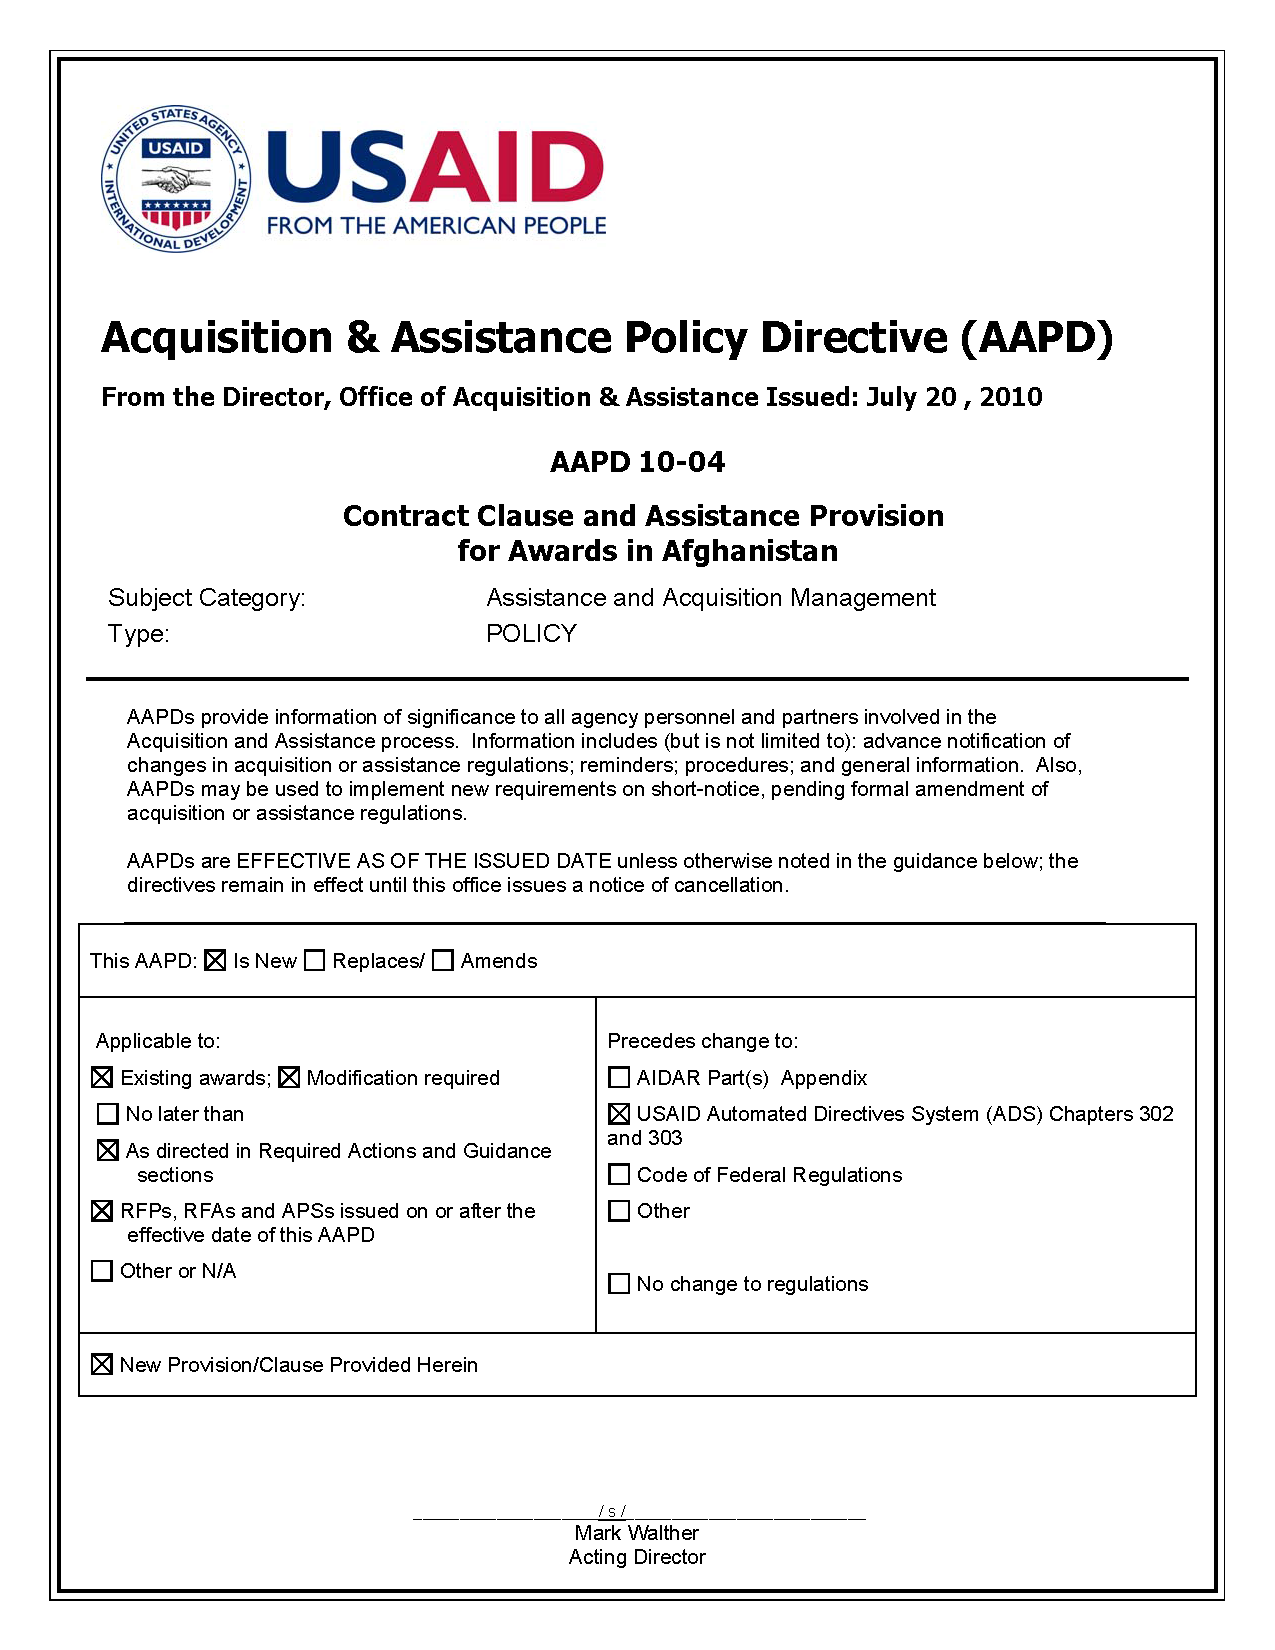 AAPD 10-04